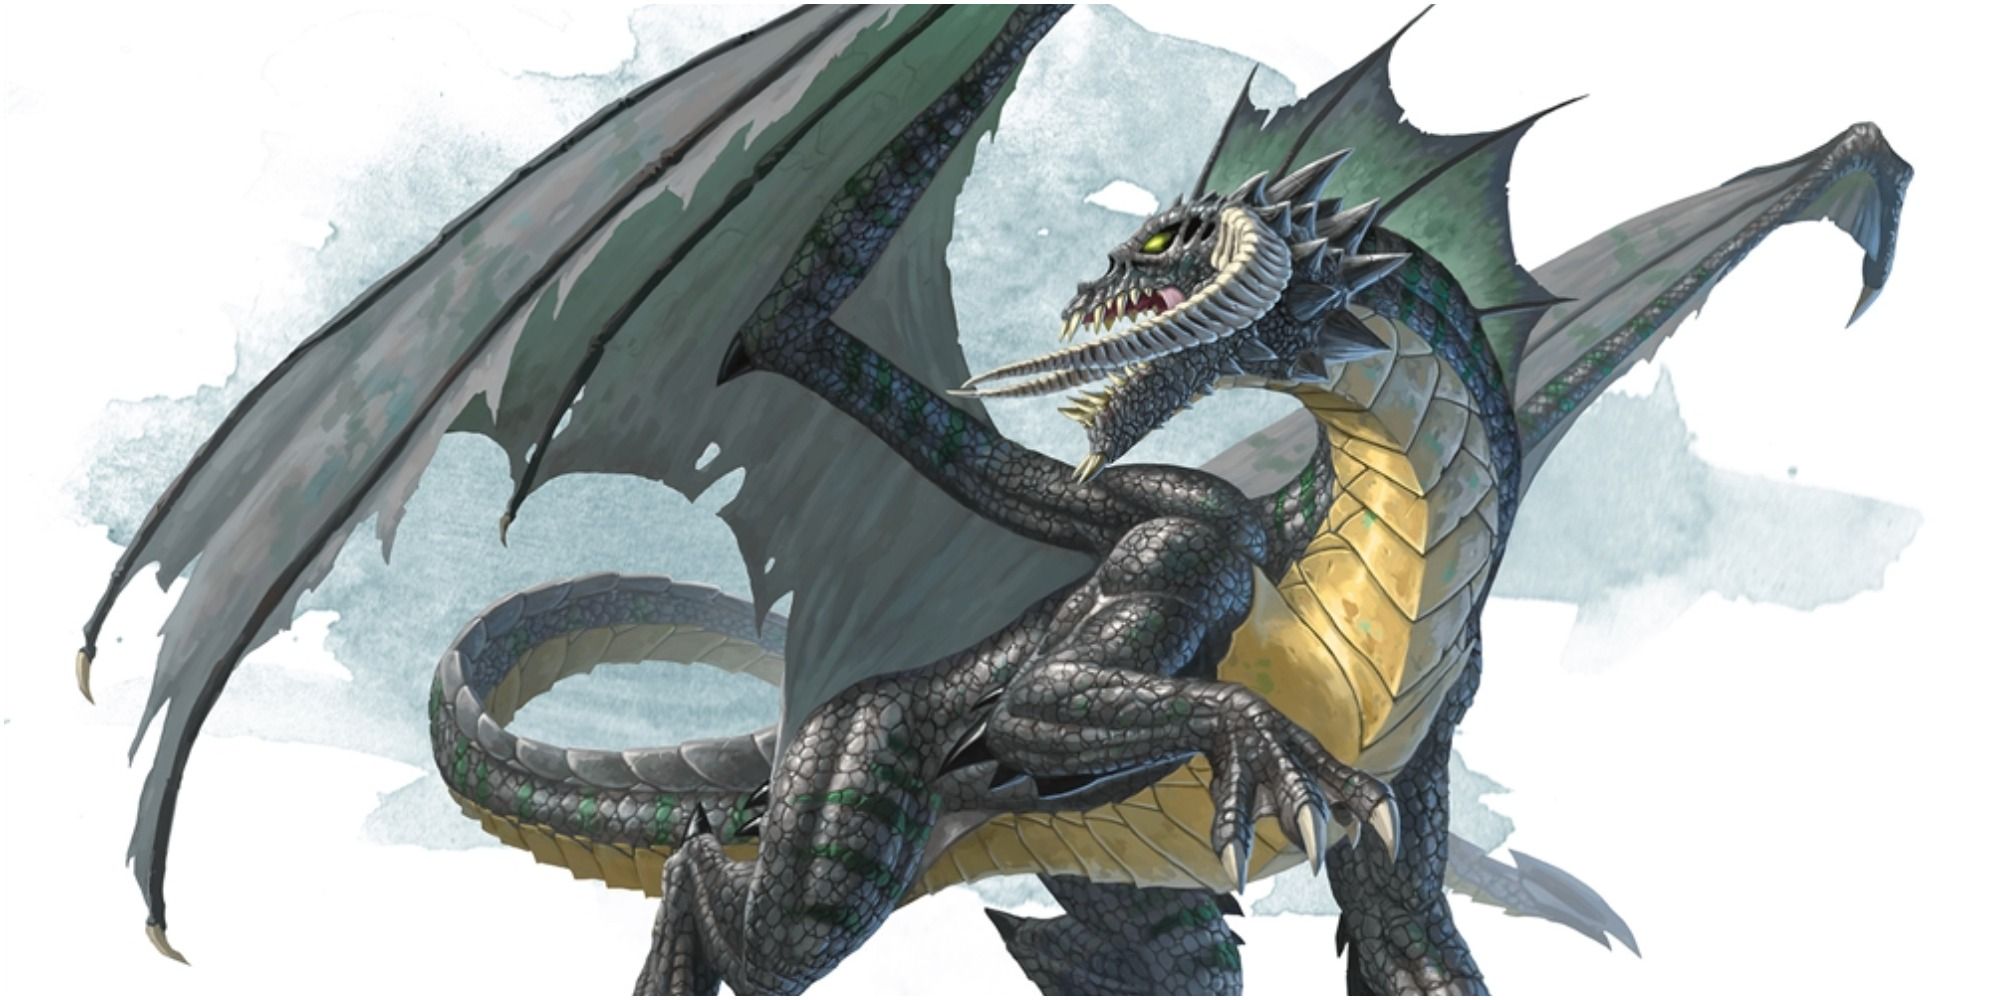 Black Dragon from Dungeons & Dragons